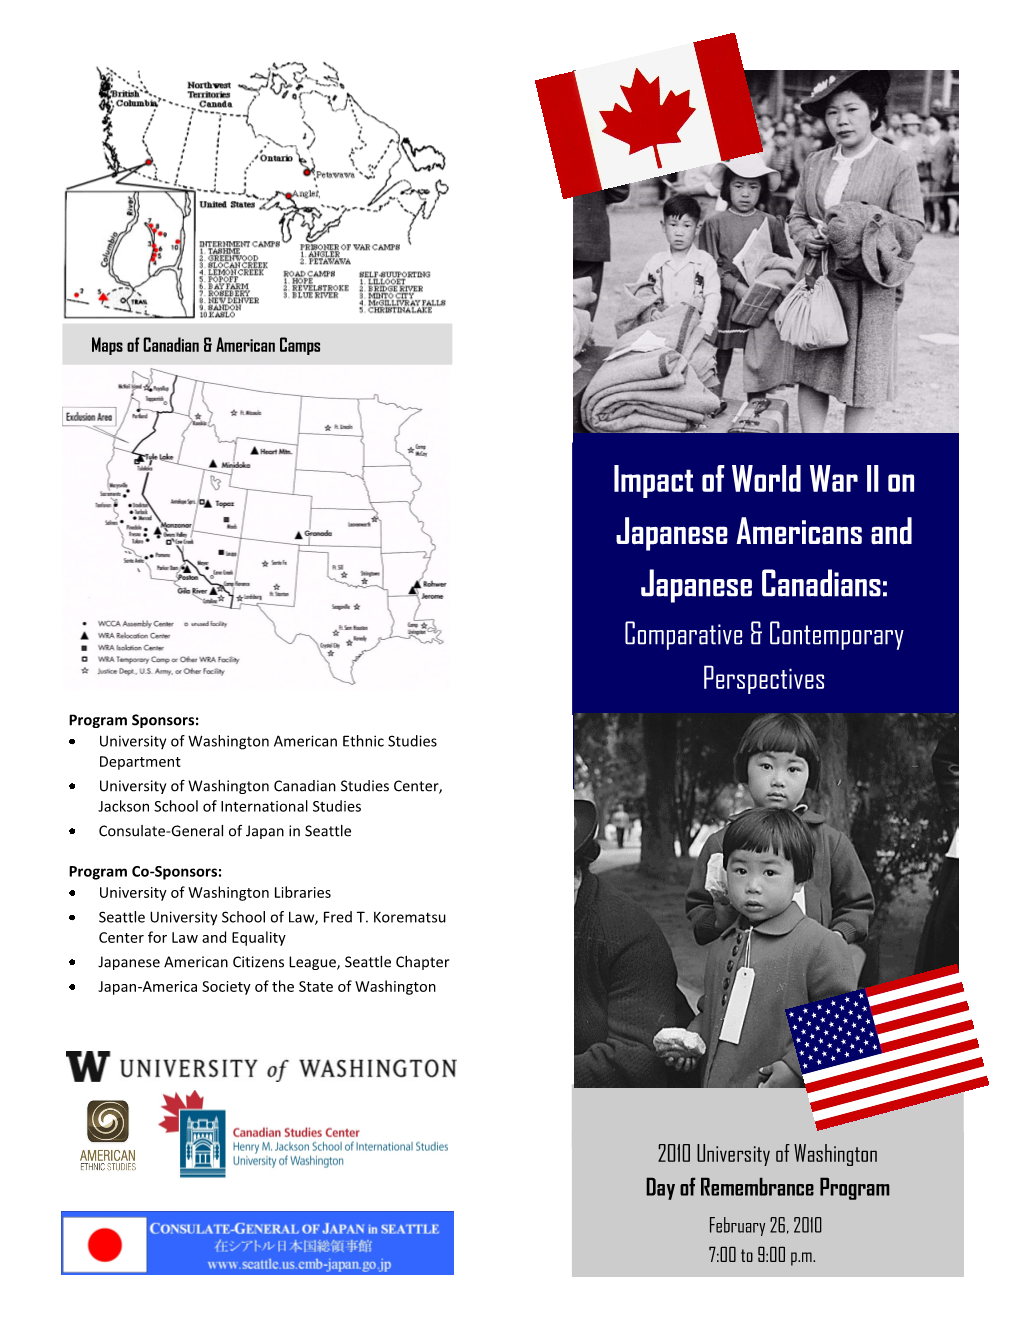 Impact of World War II on Japanese Americans and Japanese Canadians: Comparative & Contemporary Perspectives